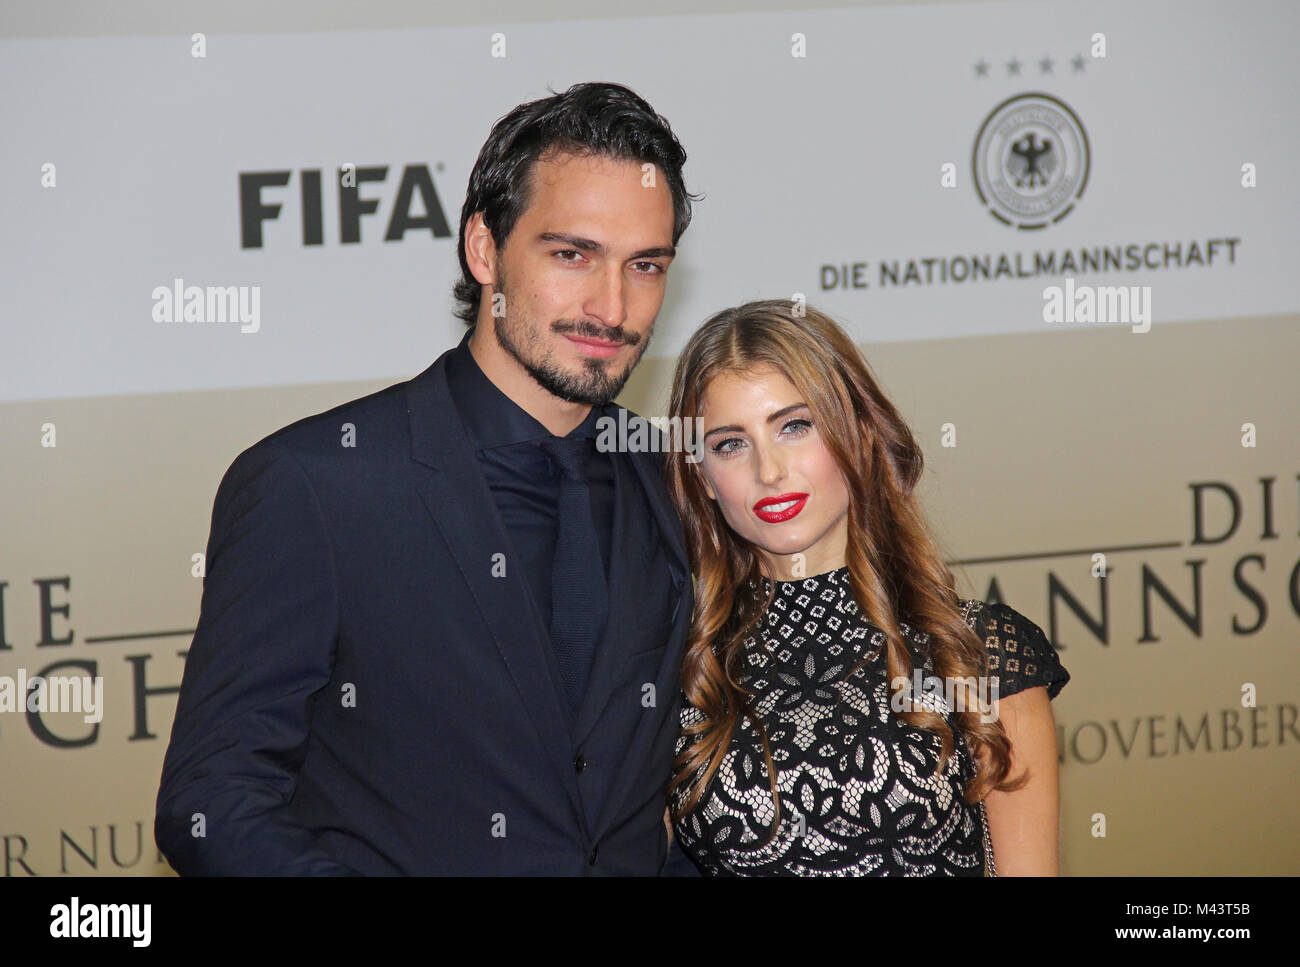 Mats Hummels with girlfriend Cathy Fischer Stock Photo - Alamy